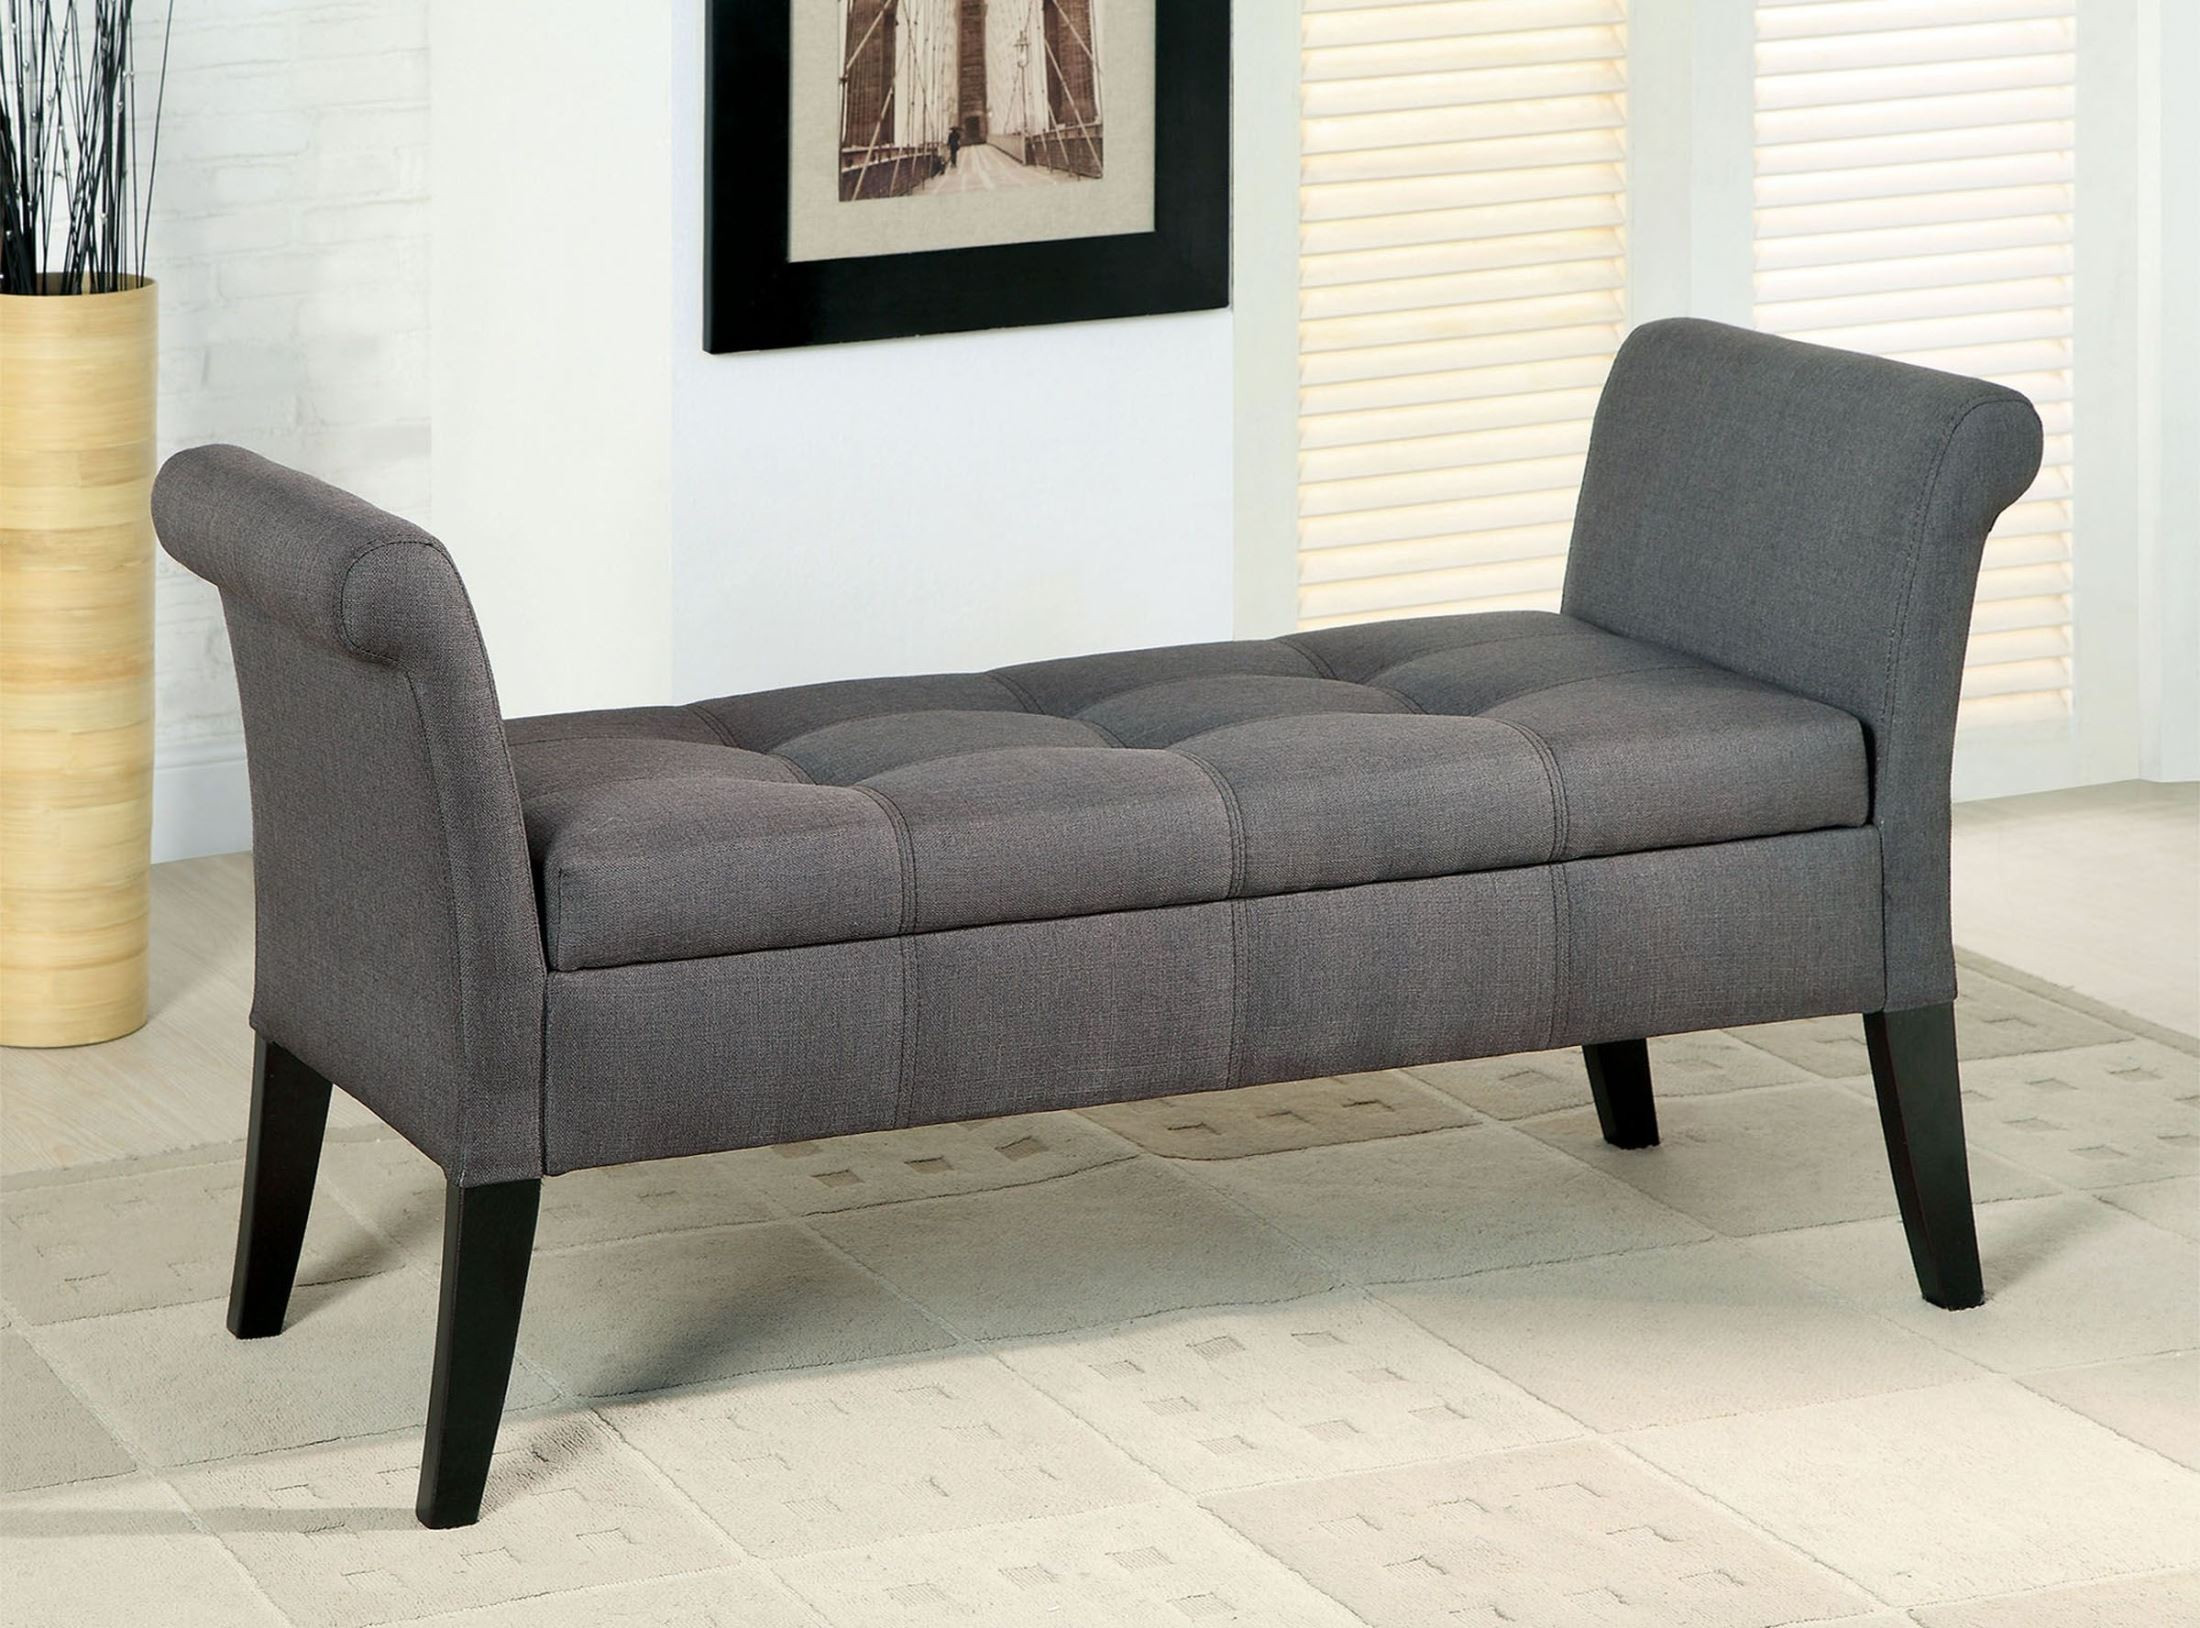 Gray Storage Bench New Doheny Gray Fabric Storage Bench From Furniture Of America